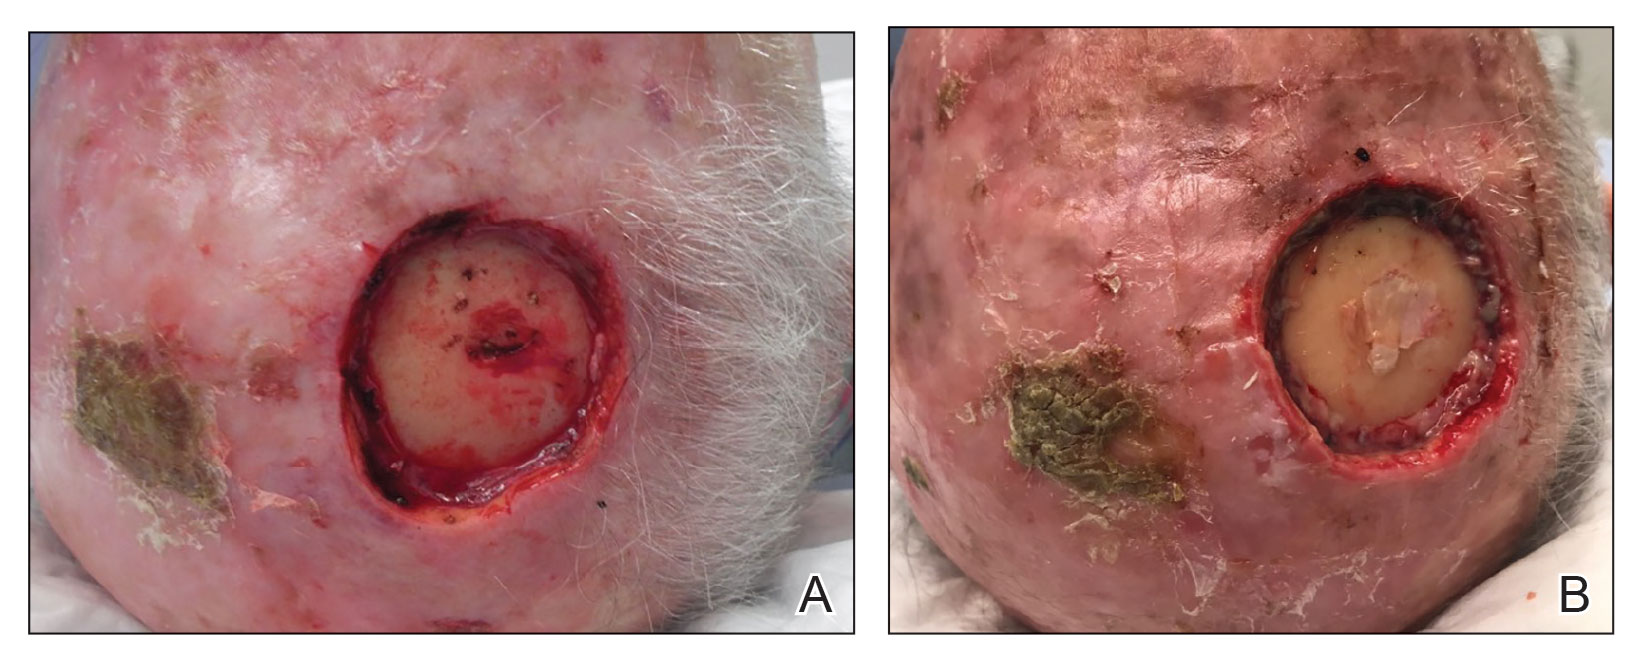 A, A bleeding surgical wound on the calvarium of the scalp. B, Bone wax in place and providing hemostasis at the bandage change.